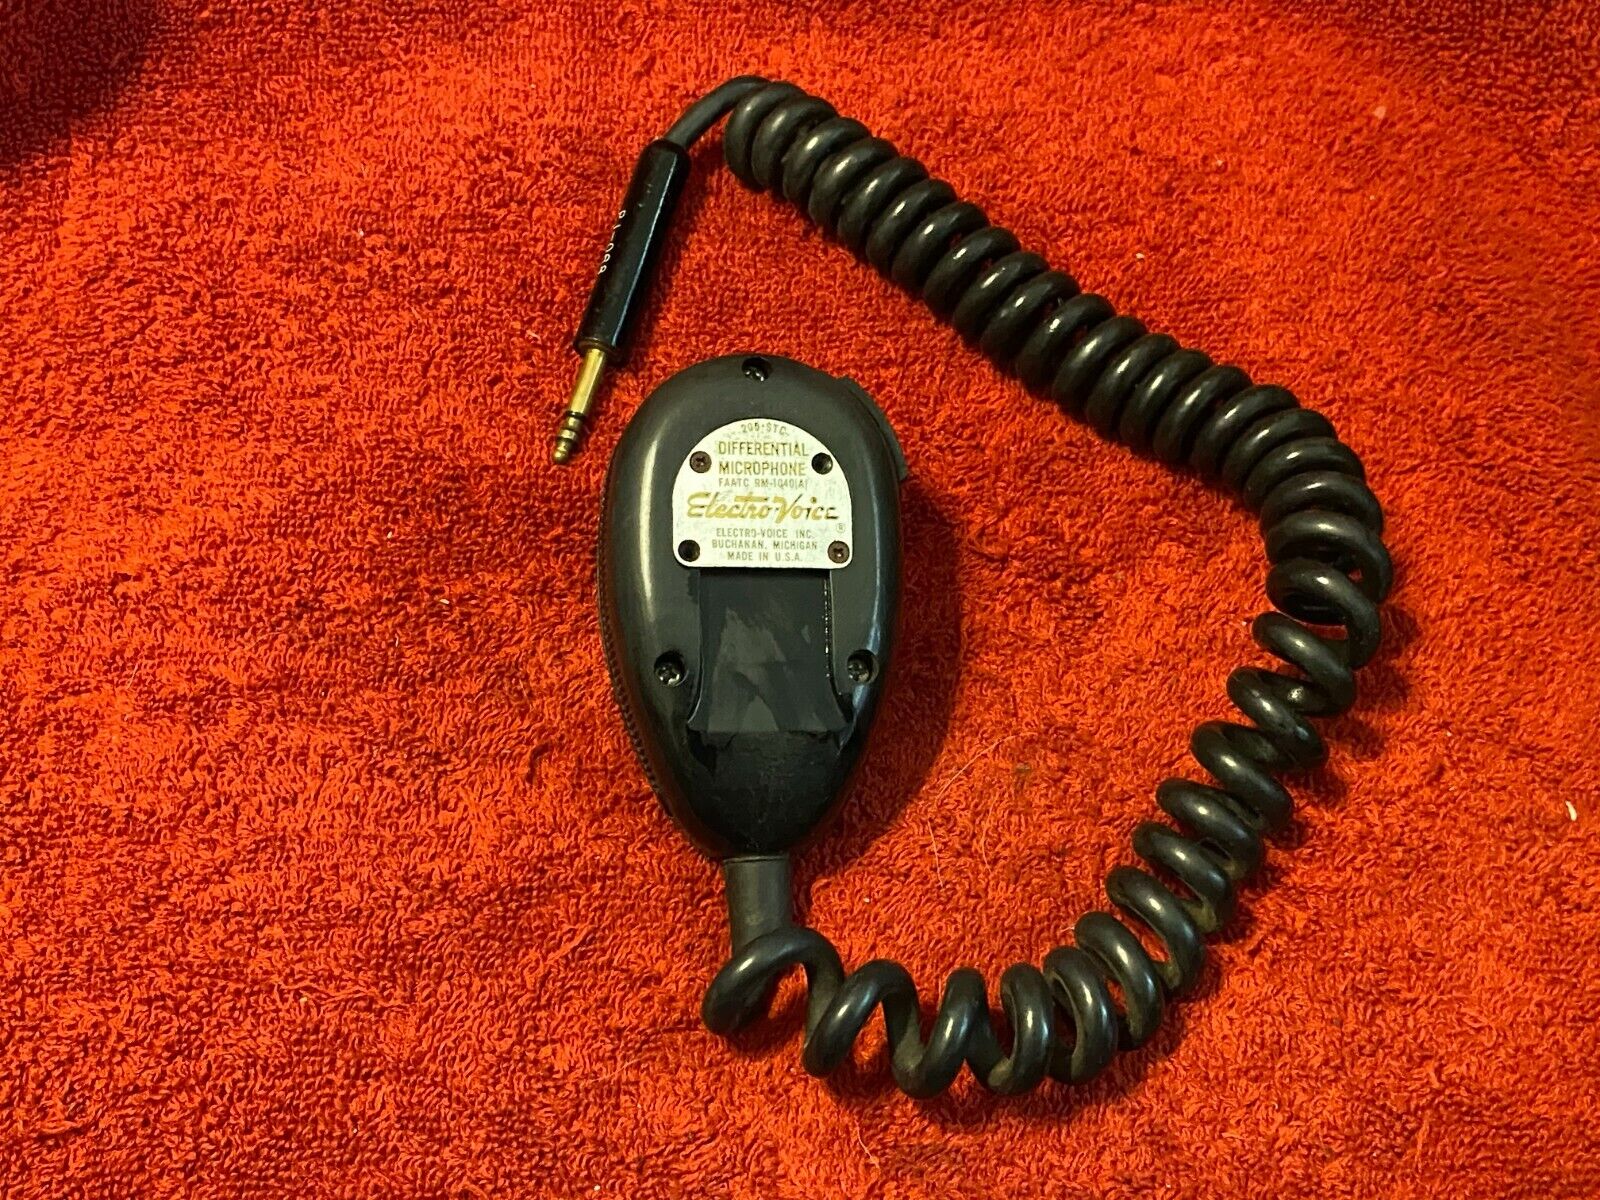 ELECTRO-VOICE MODEL 205-STC DIFFERENTIAL HANDHELD MICROPHONE 